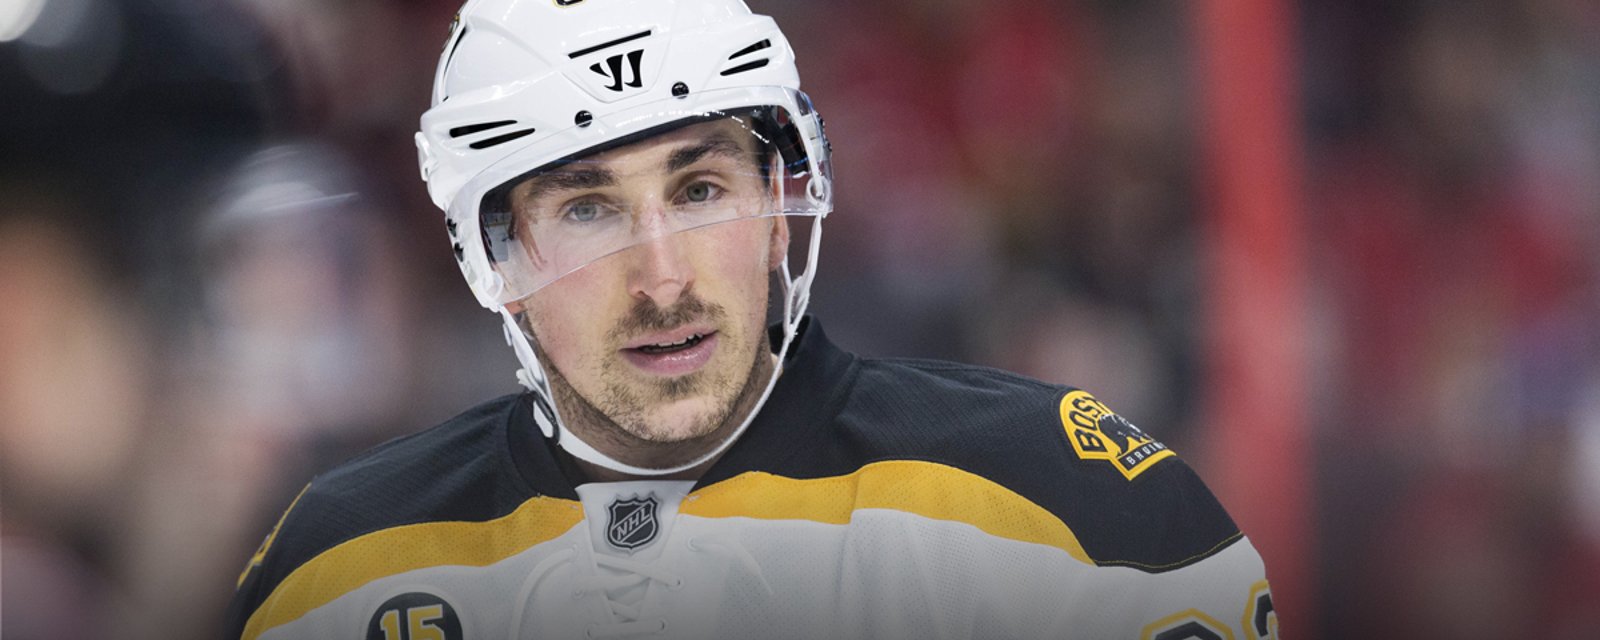 Breaking: Marchand out with injury